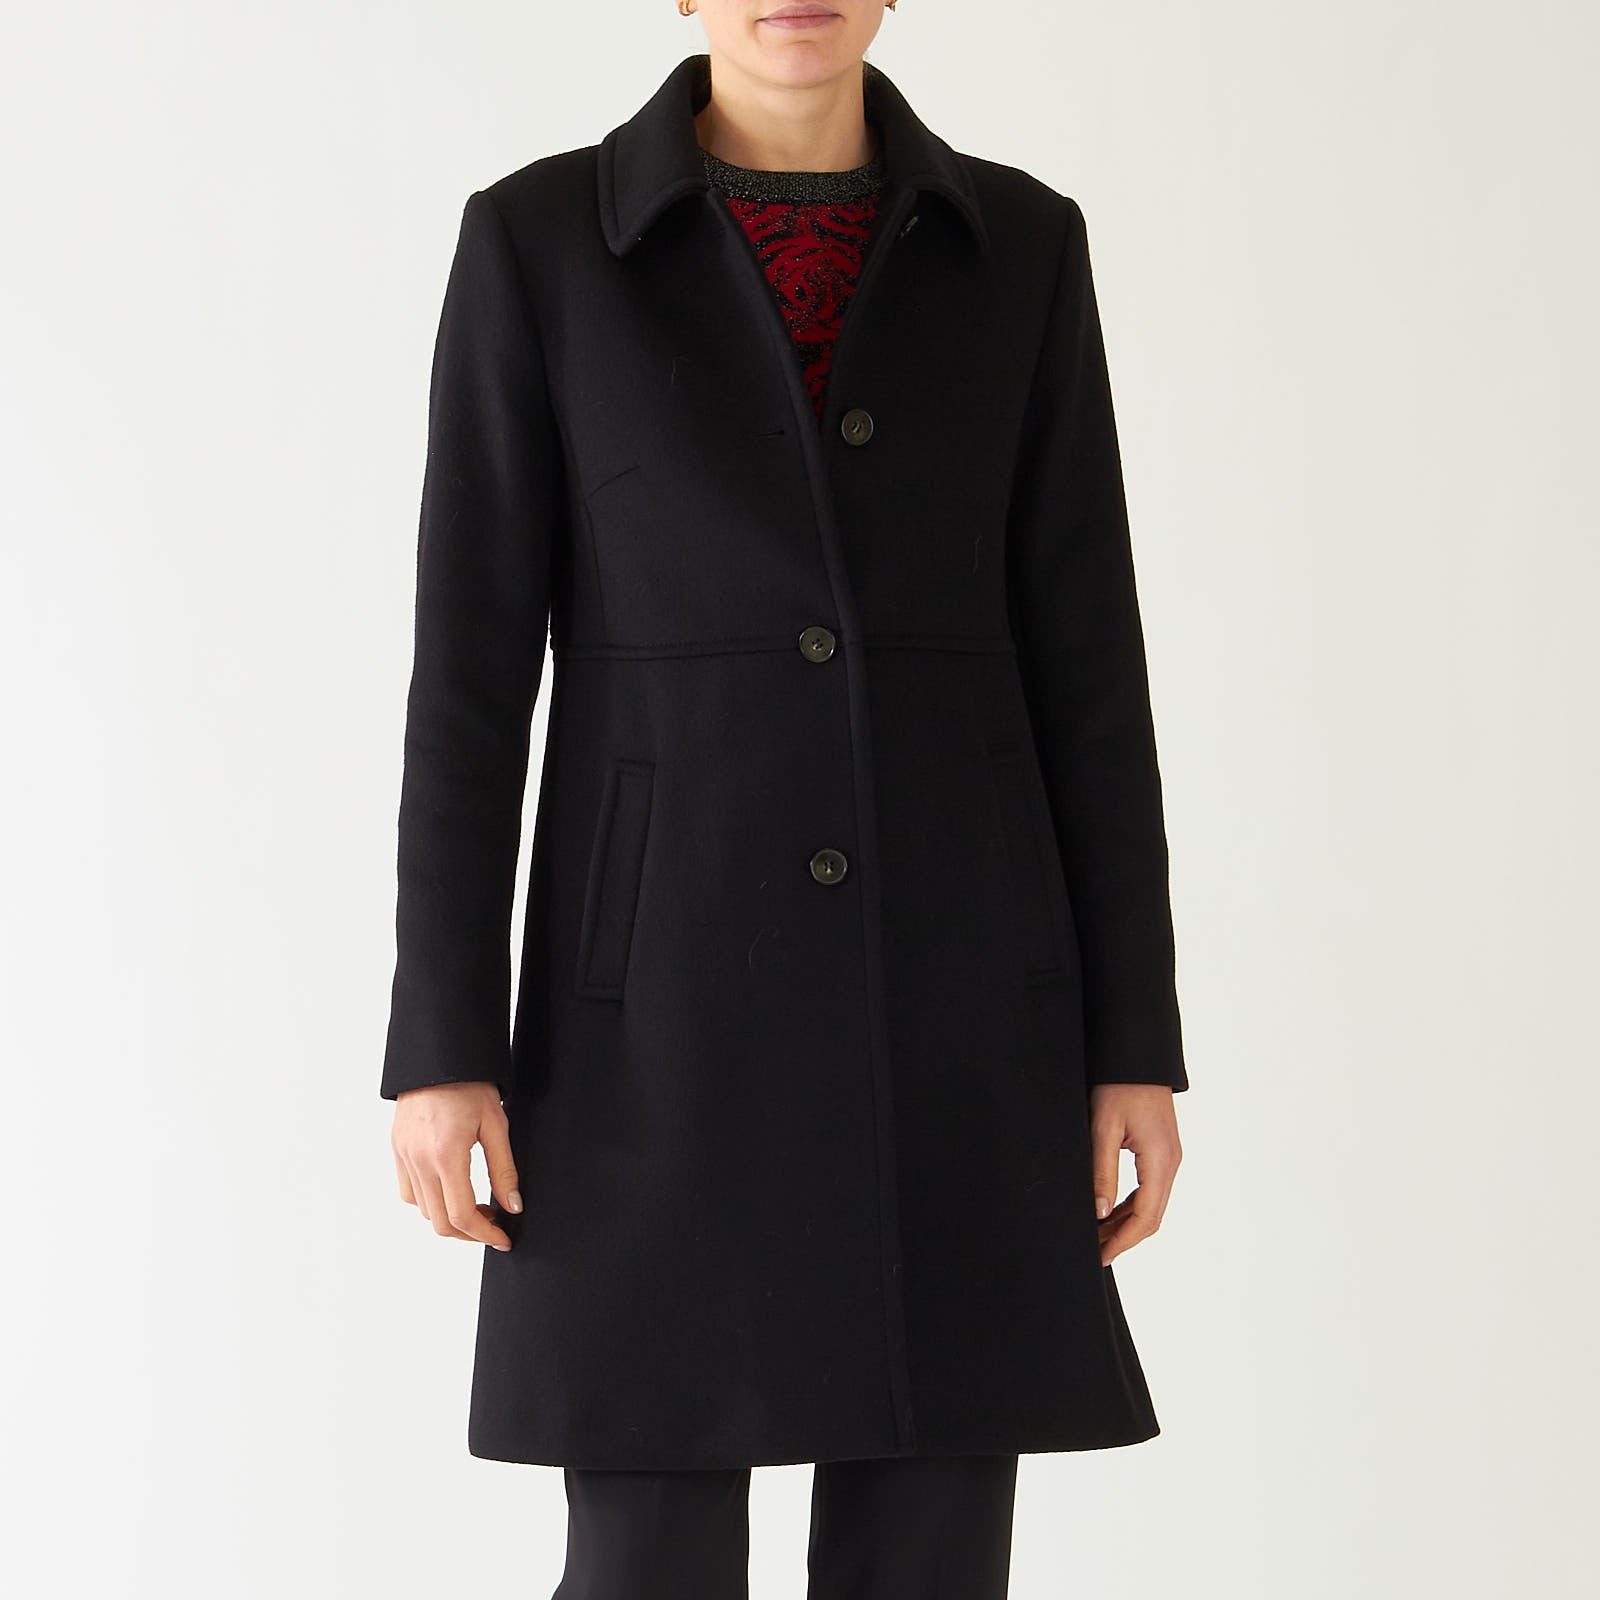 Black Collared Wool Blend Tailored Coat